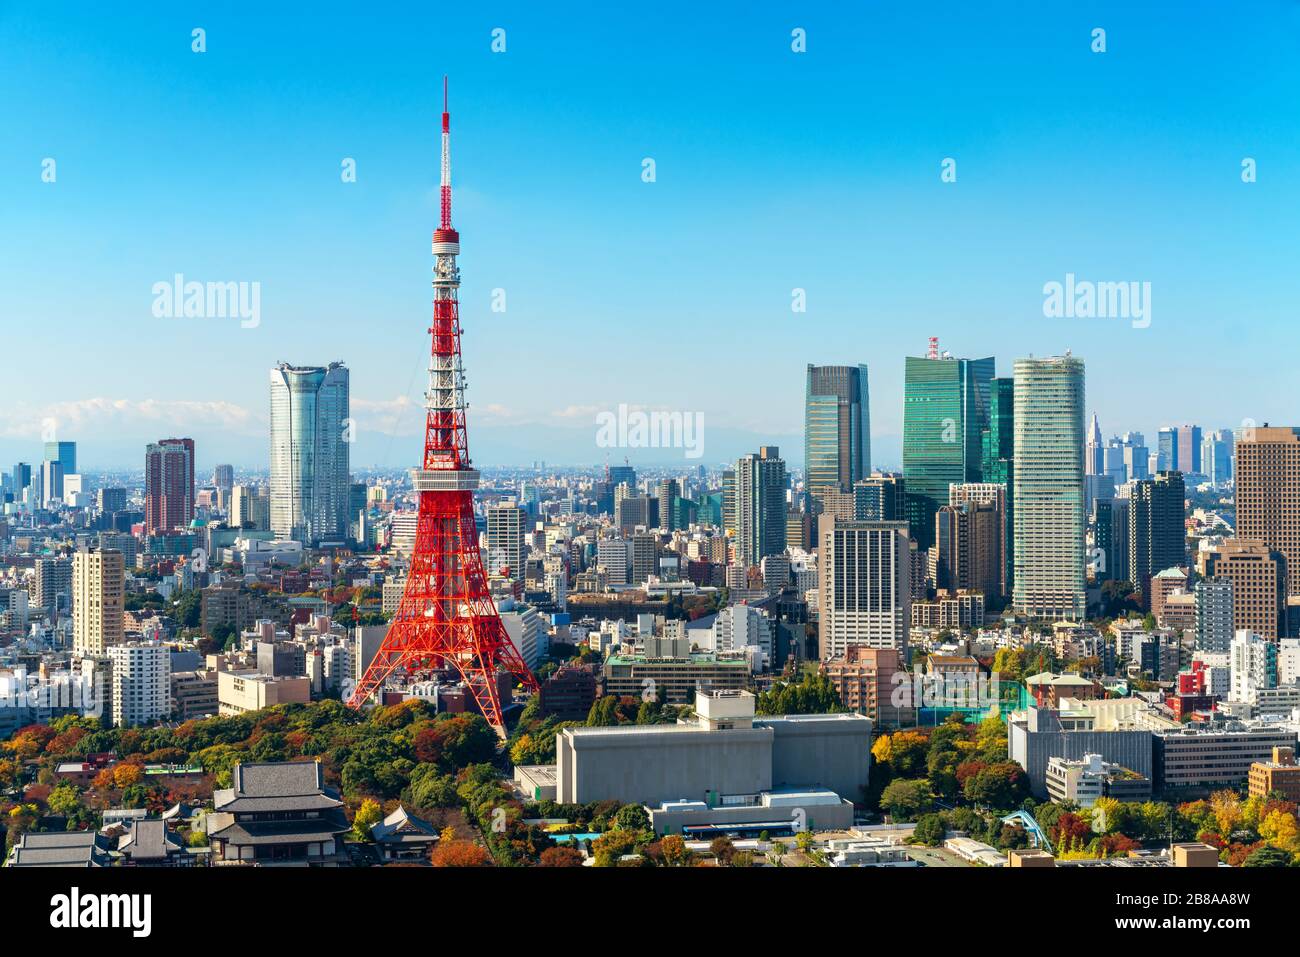 Tokyo tower, Japan. Tokyo City Skyline. Asia, Japan famous tourist destination. Aerial view of Tokyo tower. Japanese central business district, downto Stock Photo